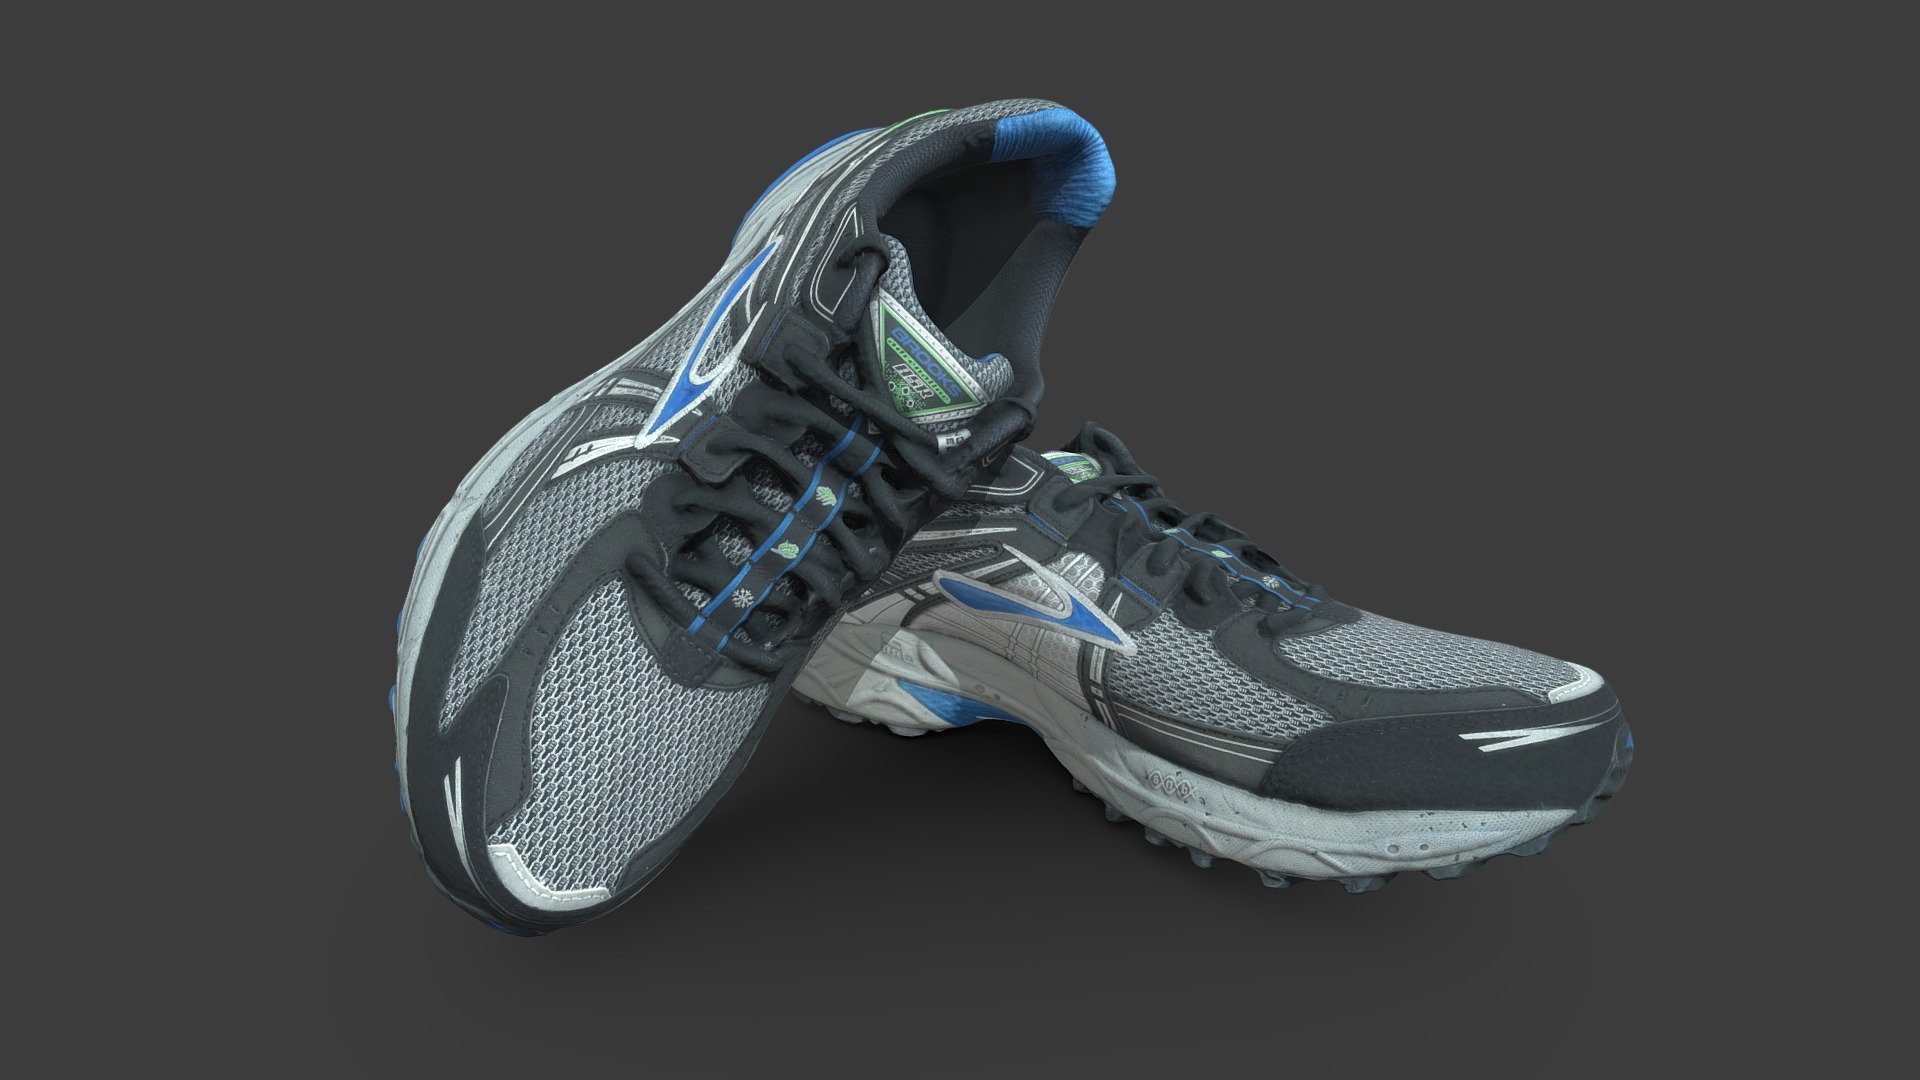 Since there was a longer break between my last photogrammetry sessions, I decided to try something new. The 3D object is a photoscan of the Brooks Adrenalin GTS running shoe 3d model